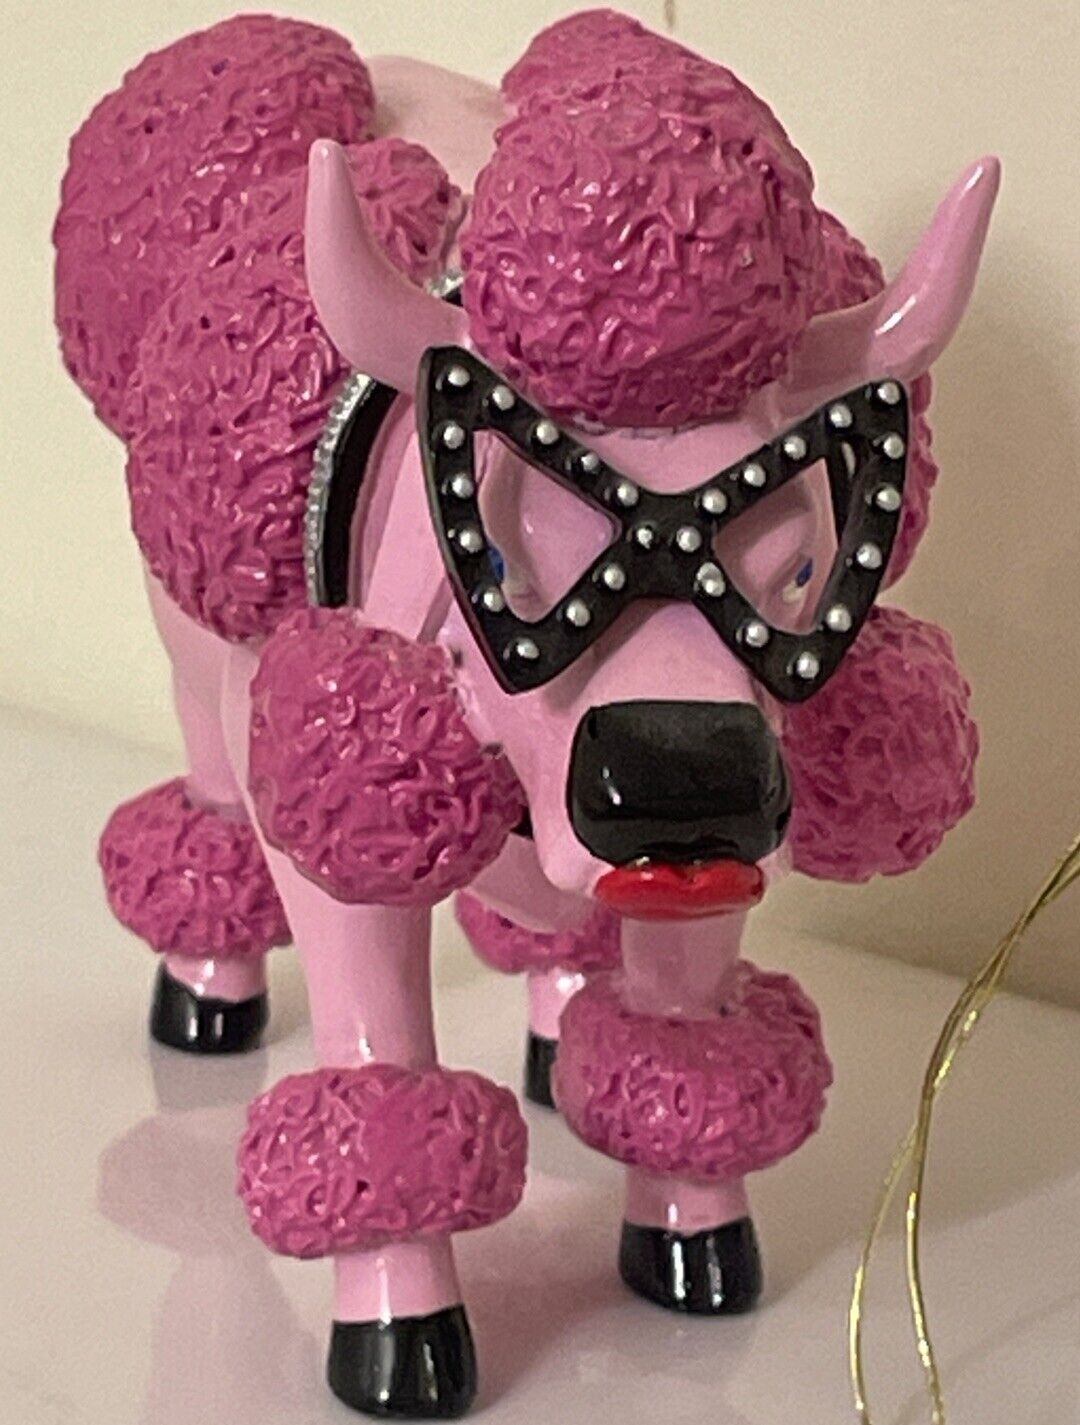 VTG COWPARADE FRENCH MOODLE COW FIGURINE PINK POODLE 2001 HOUSTON RETIRE TAG/BOX